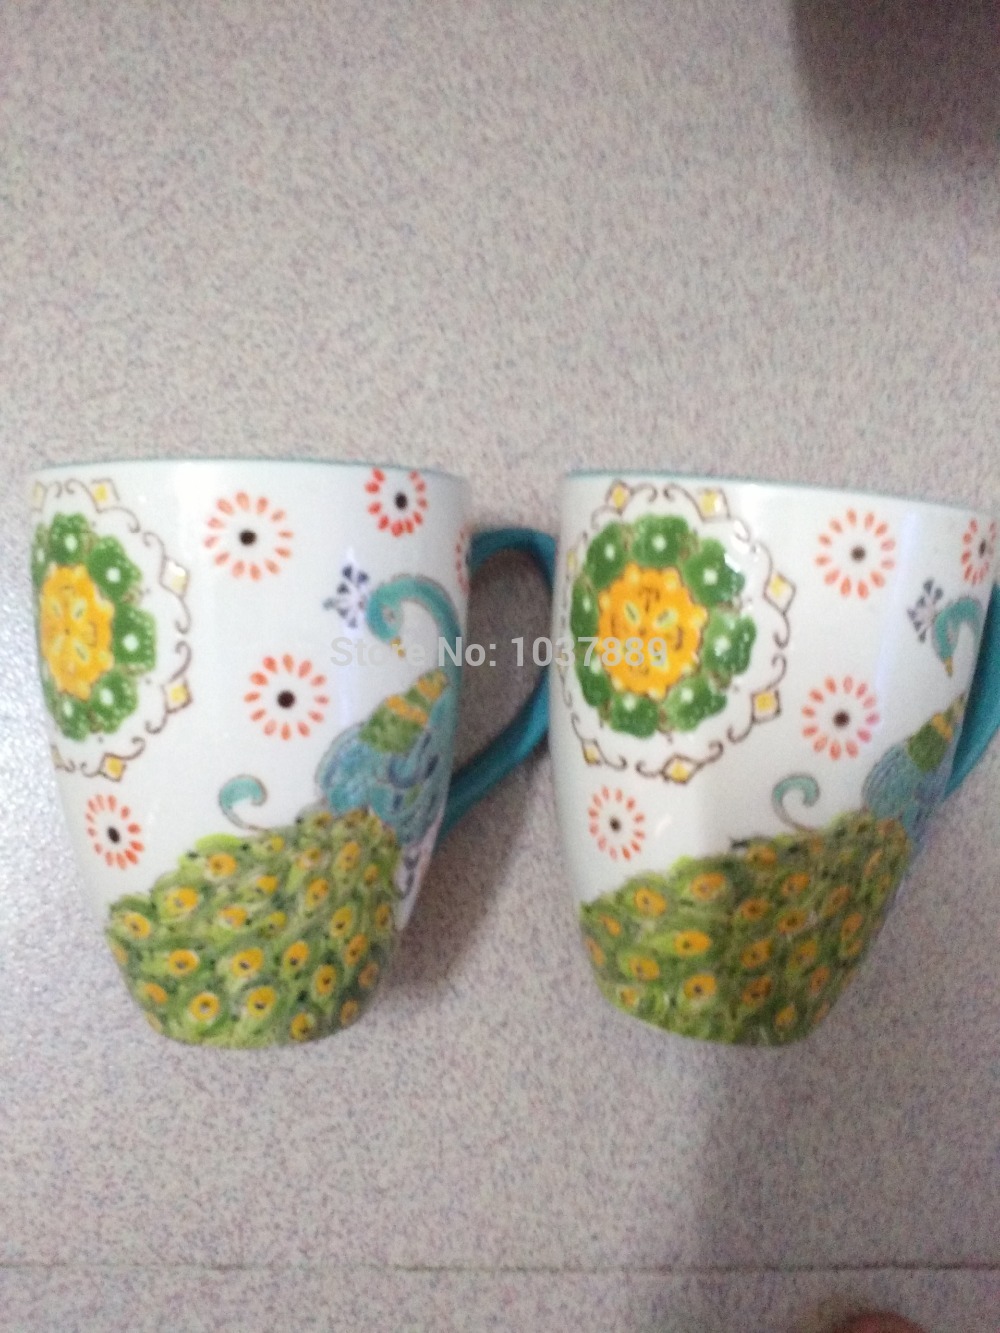 coffe cup ceramic cup tea set vacuumcup ceramic gift chinese style tea cup new arrived cup